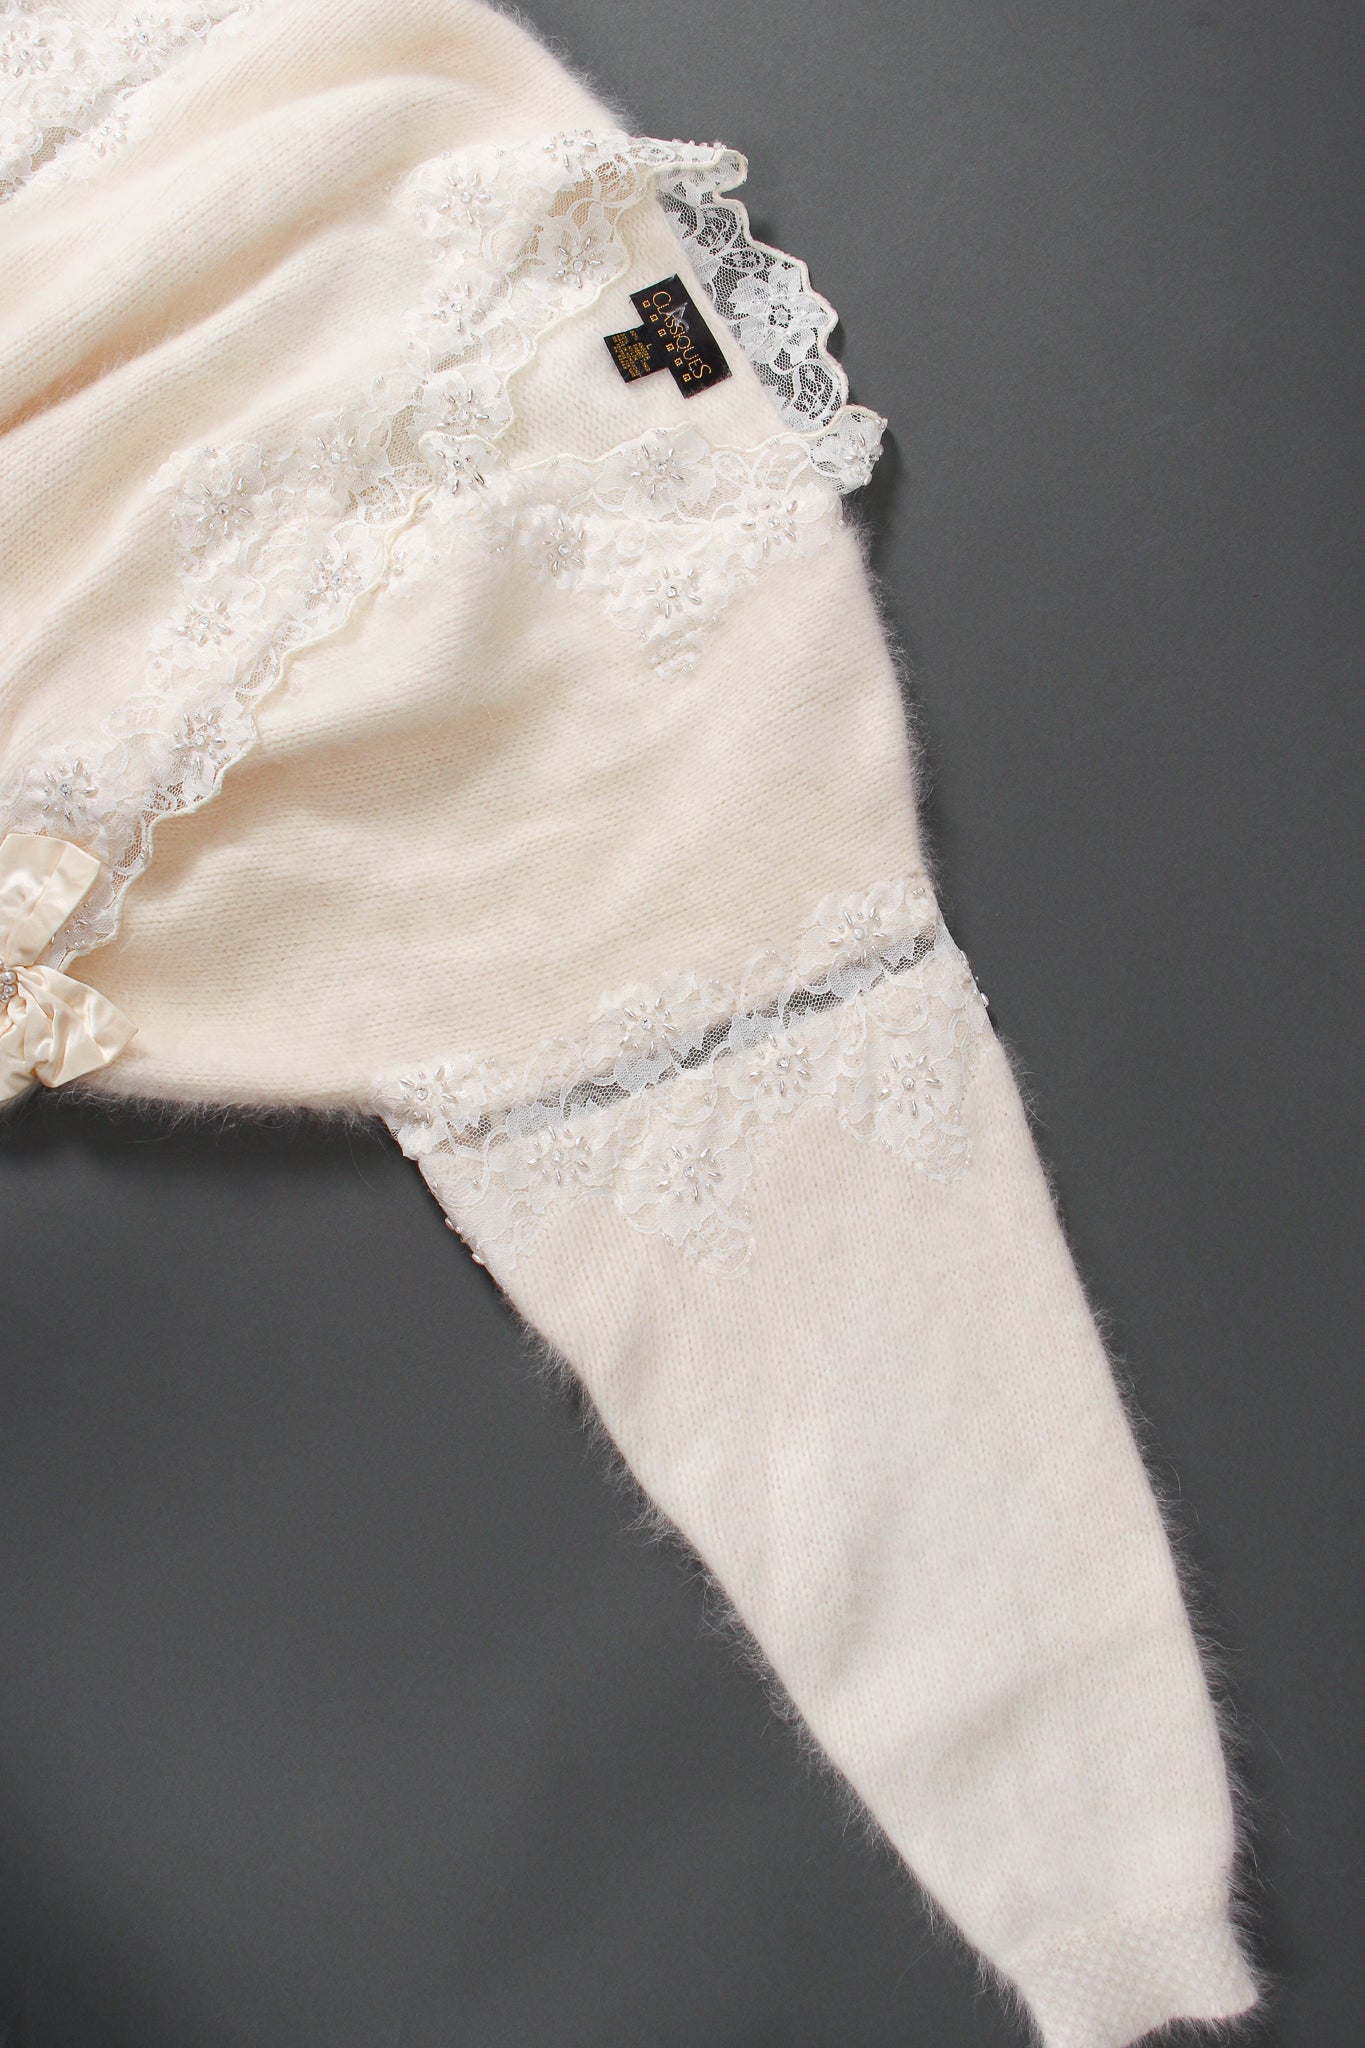 Vintage Classiques Lace Angora Sweater sleeve detail at Recess Los Angeles